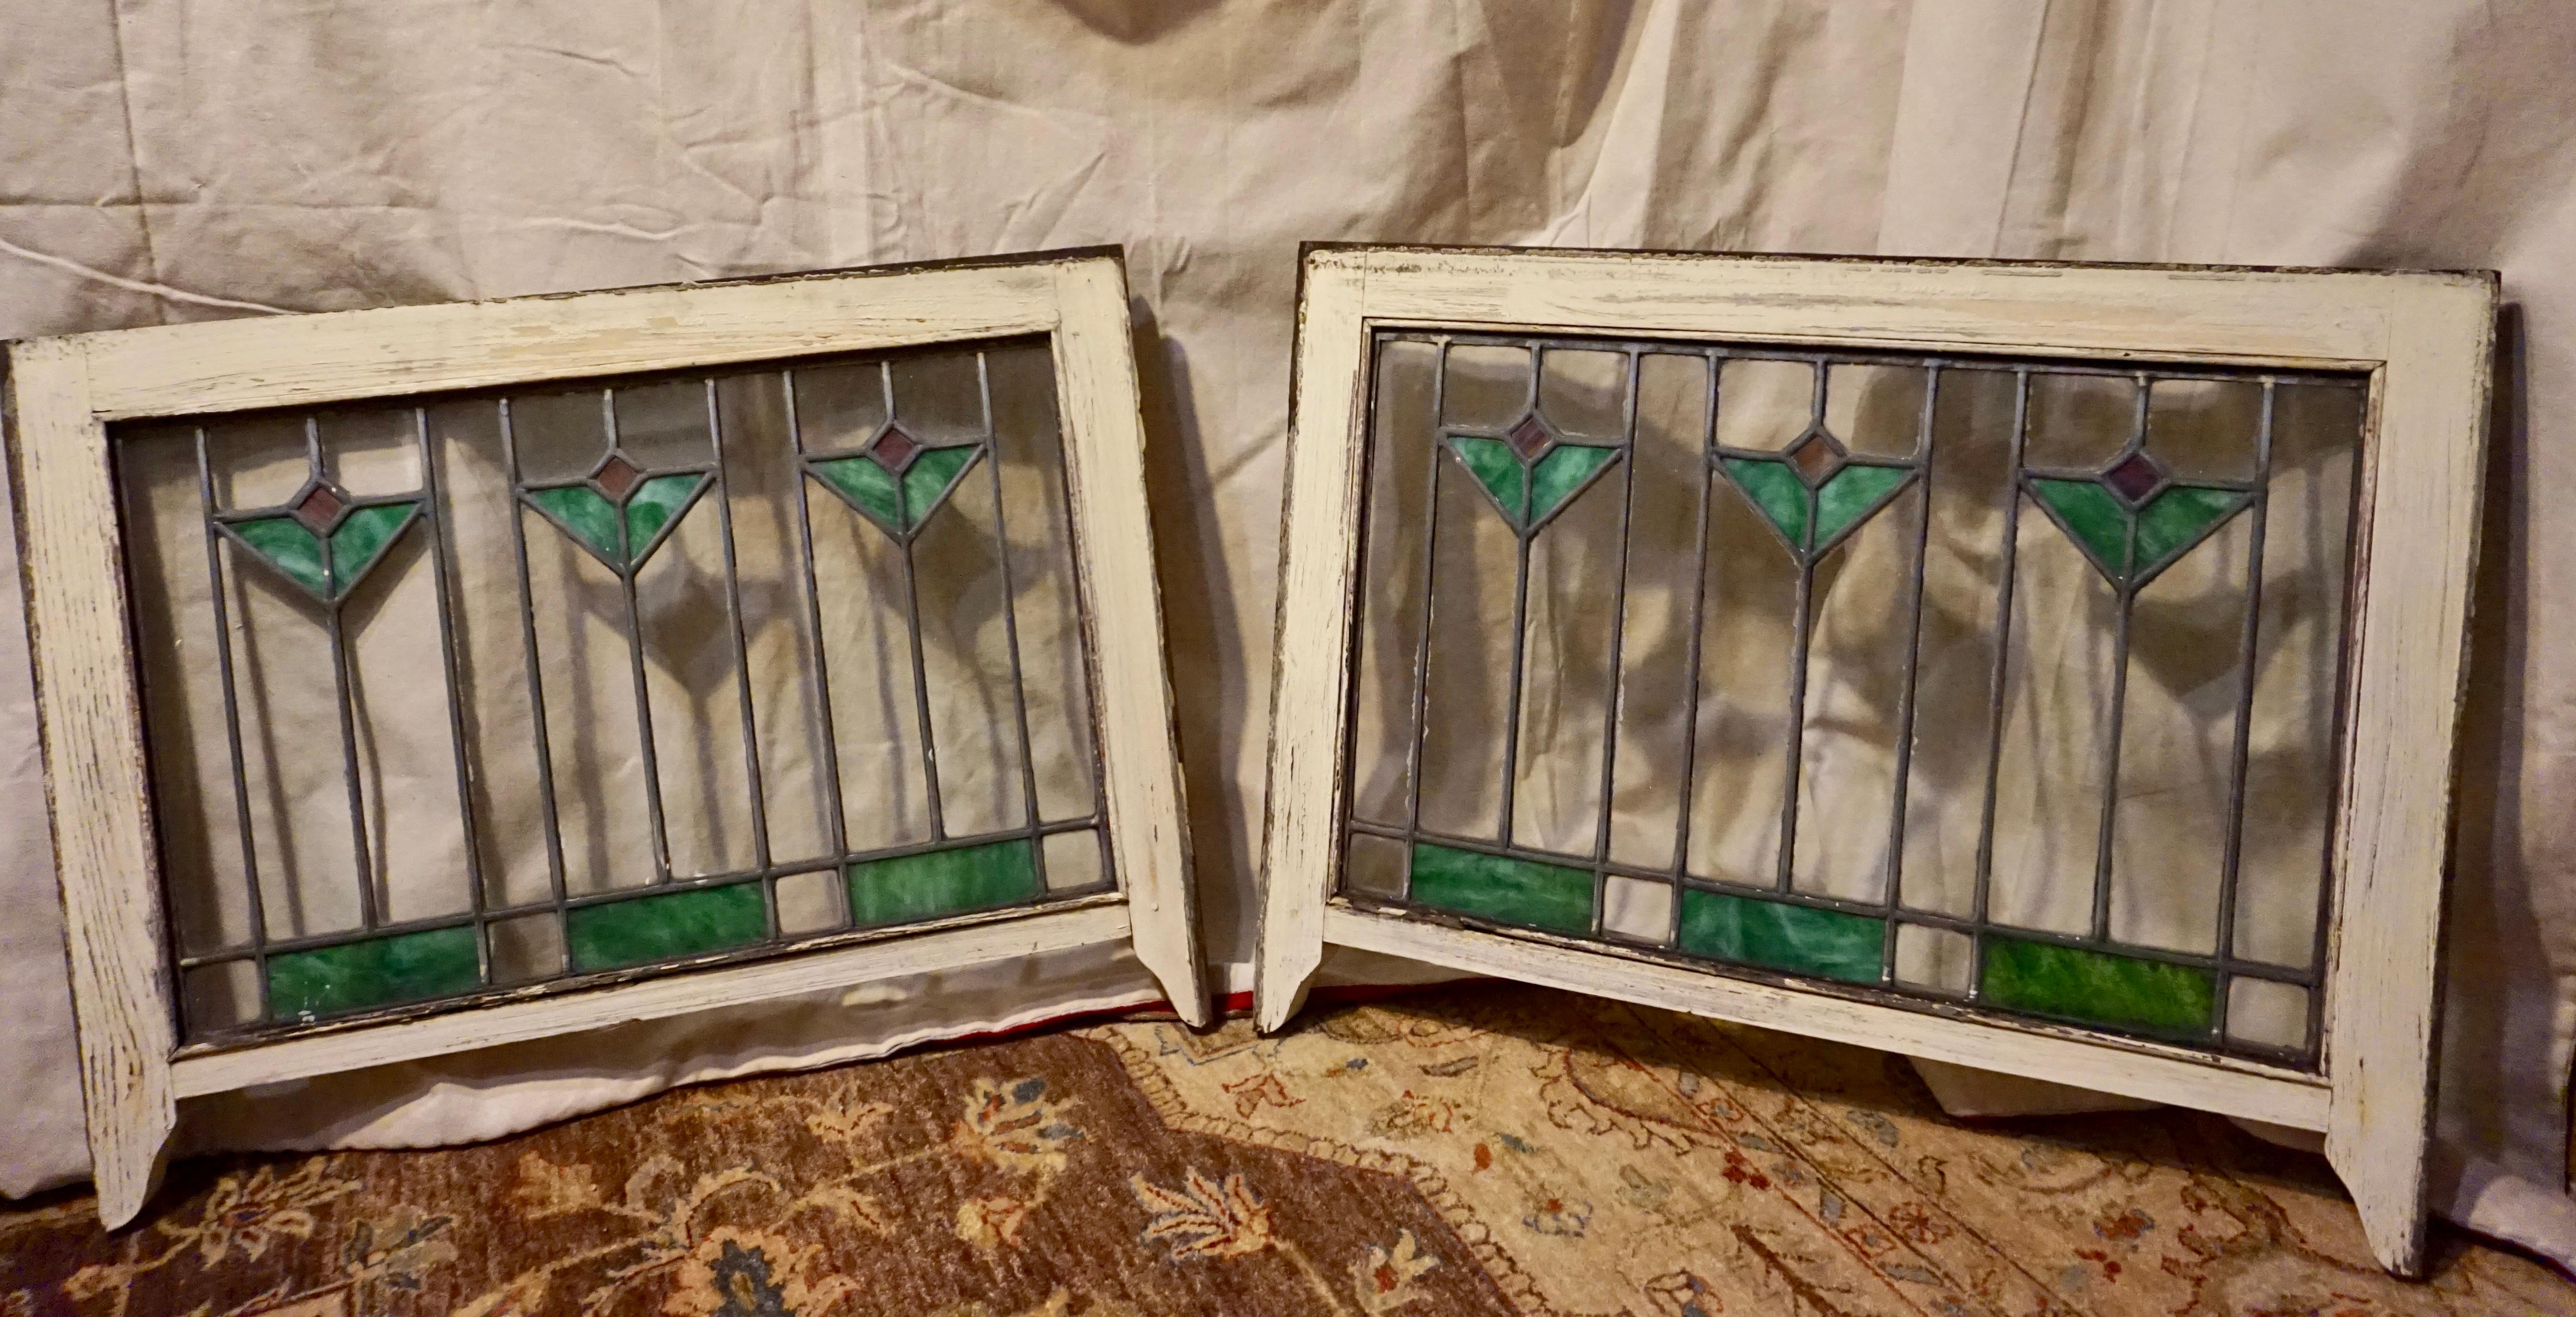 Hand-Crafted Rare Arts & Crafts Stained Glass Windows with Two-Tone Geometric Floral Theme For Sale